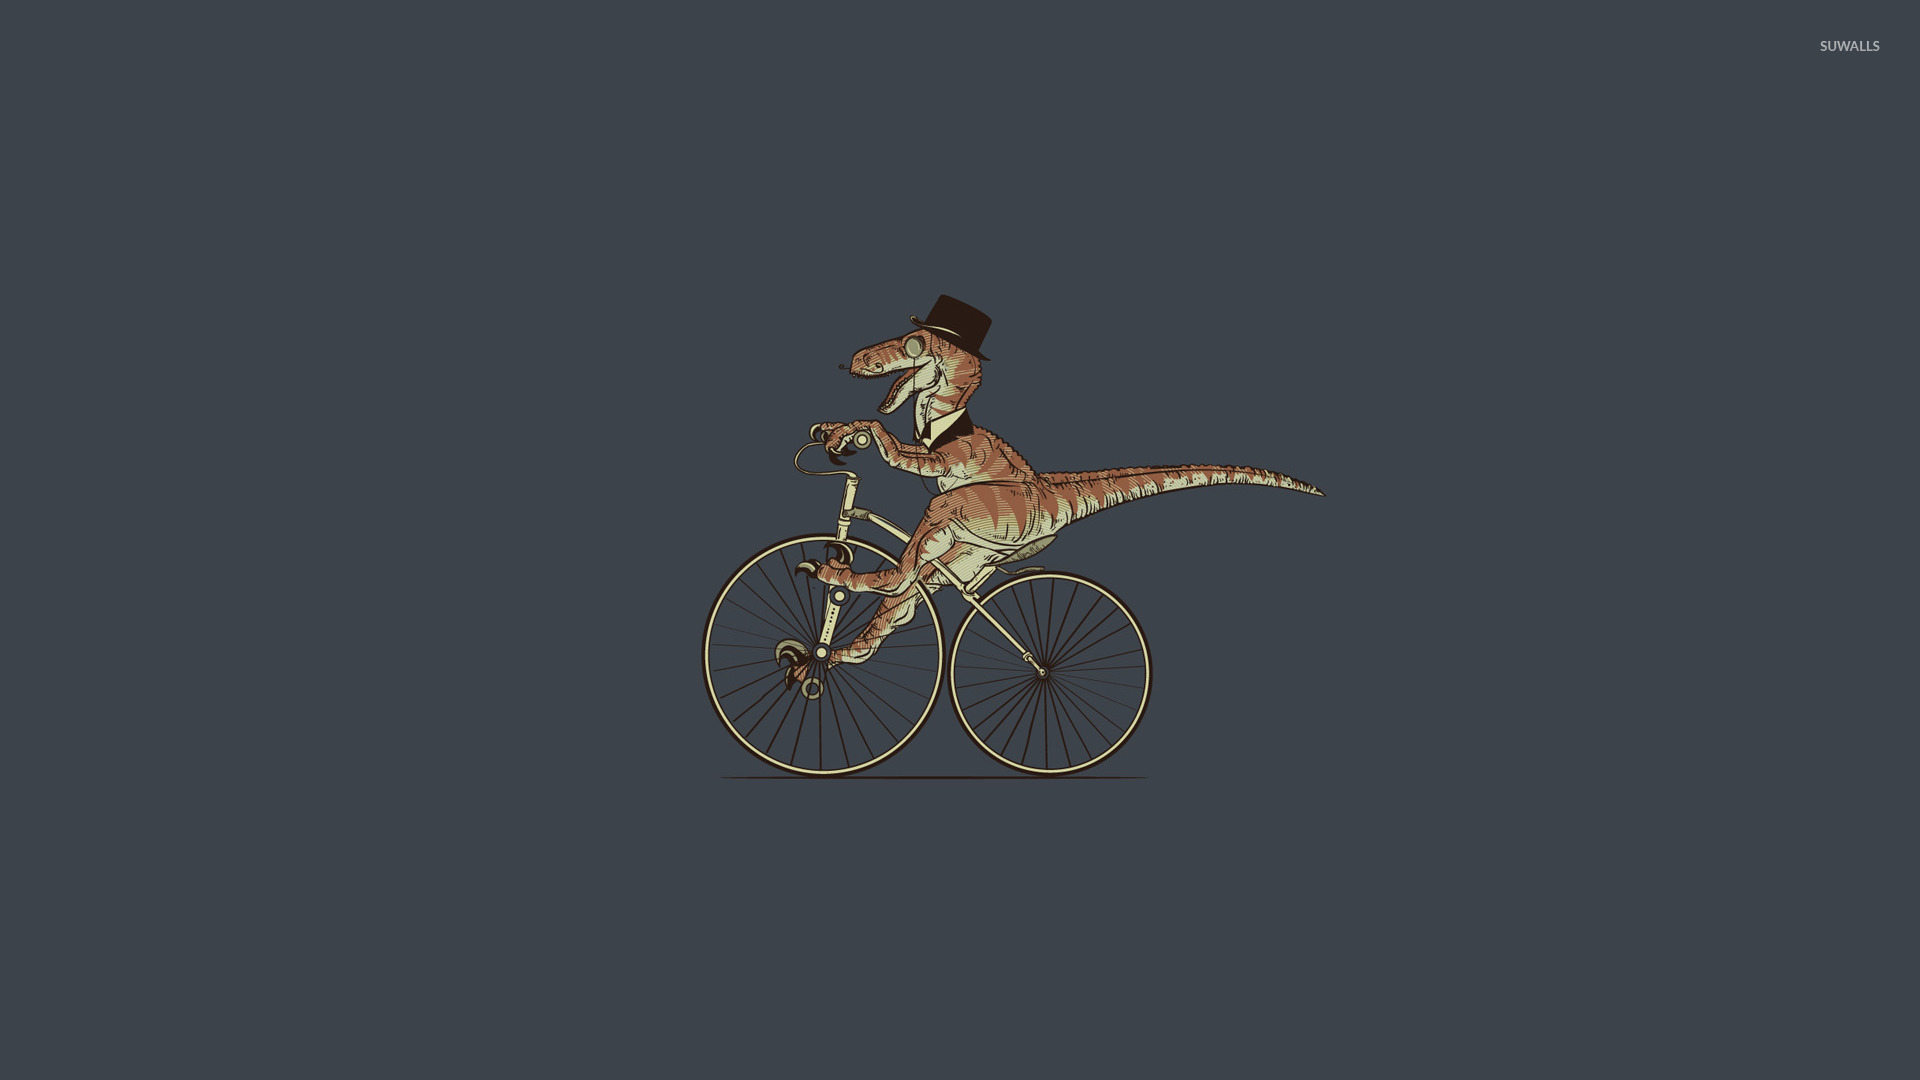 T Rex On Bicycle Wallpaper Funny